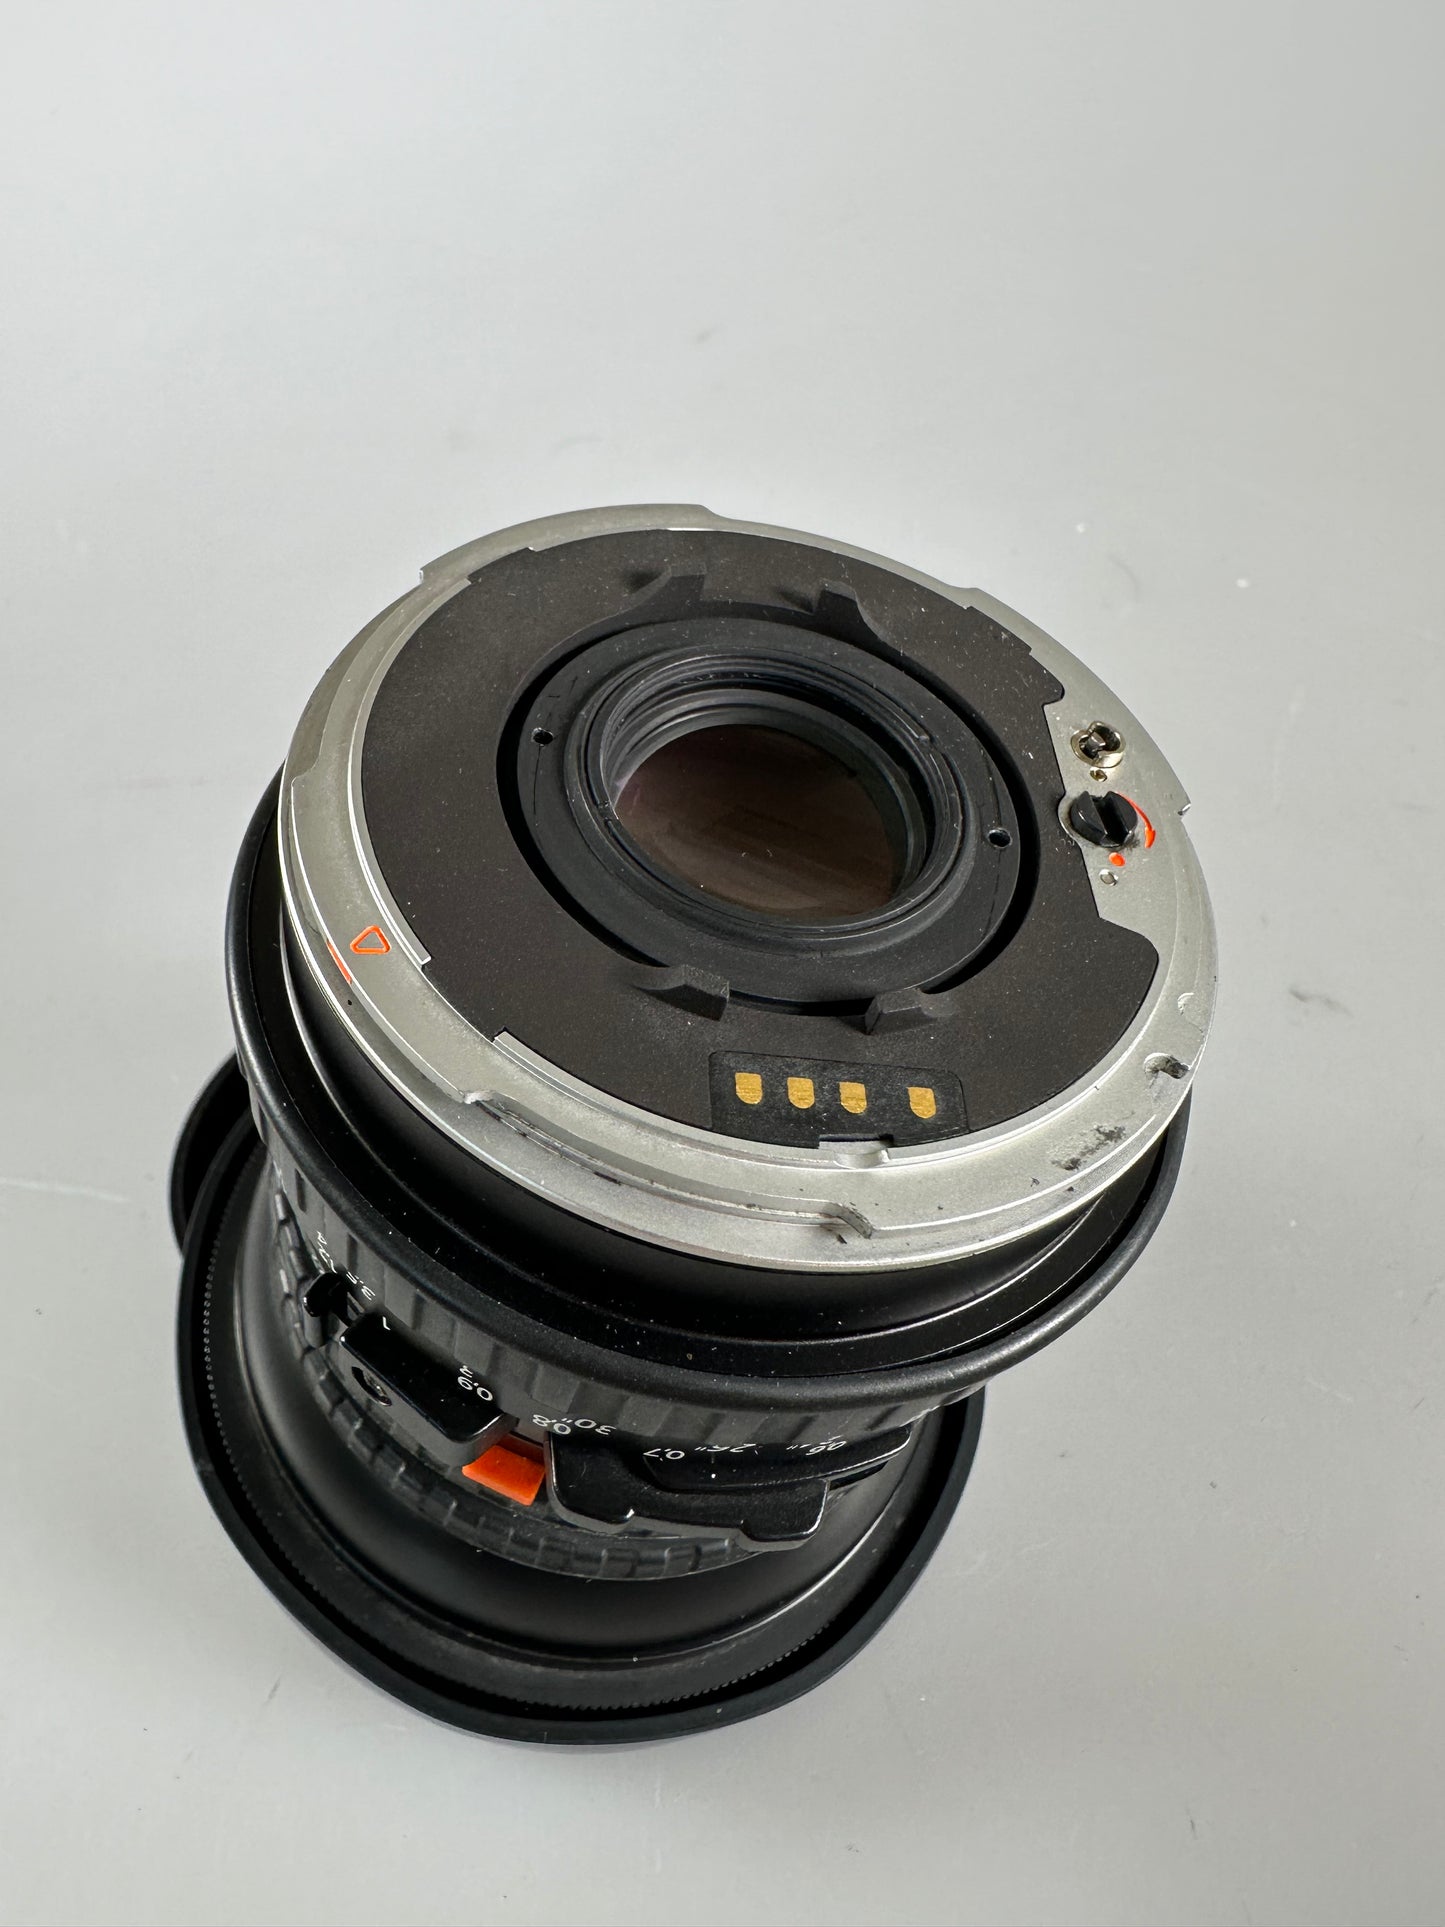 Hasselblad Distagon T* 40mm f4 CFE FLE Lens